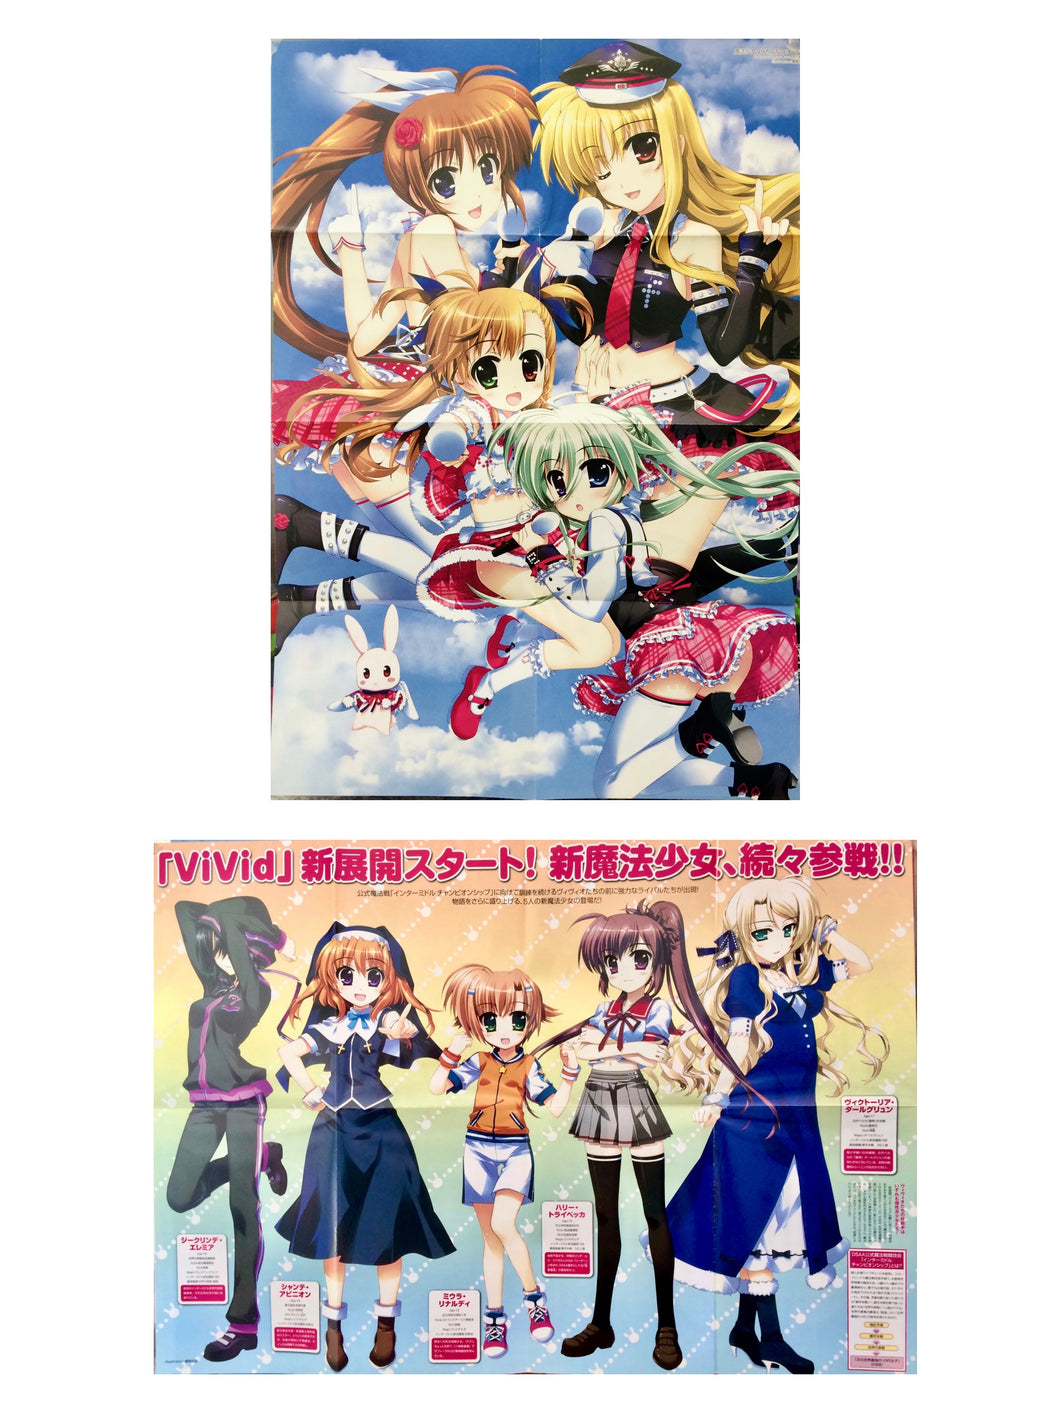 Magical Girl Lyrical Nanoha - B2 Double-sided Poster - Comp Ace Appendix